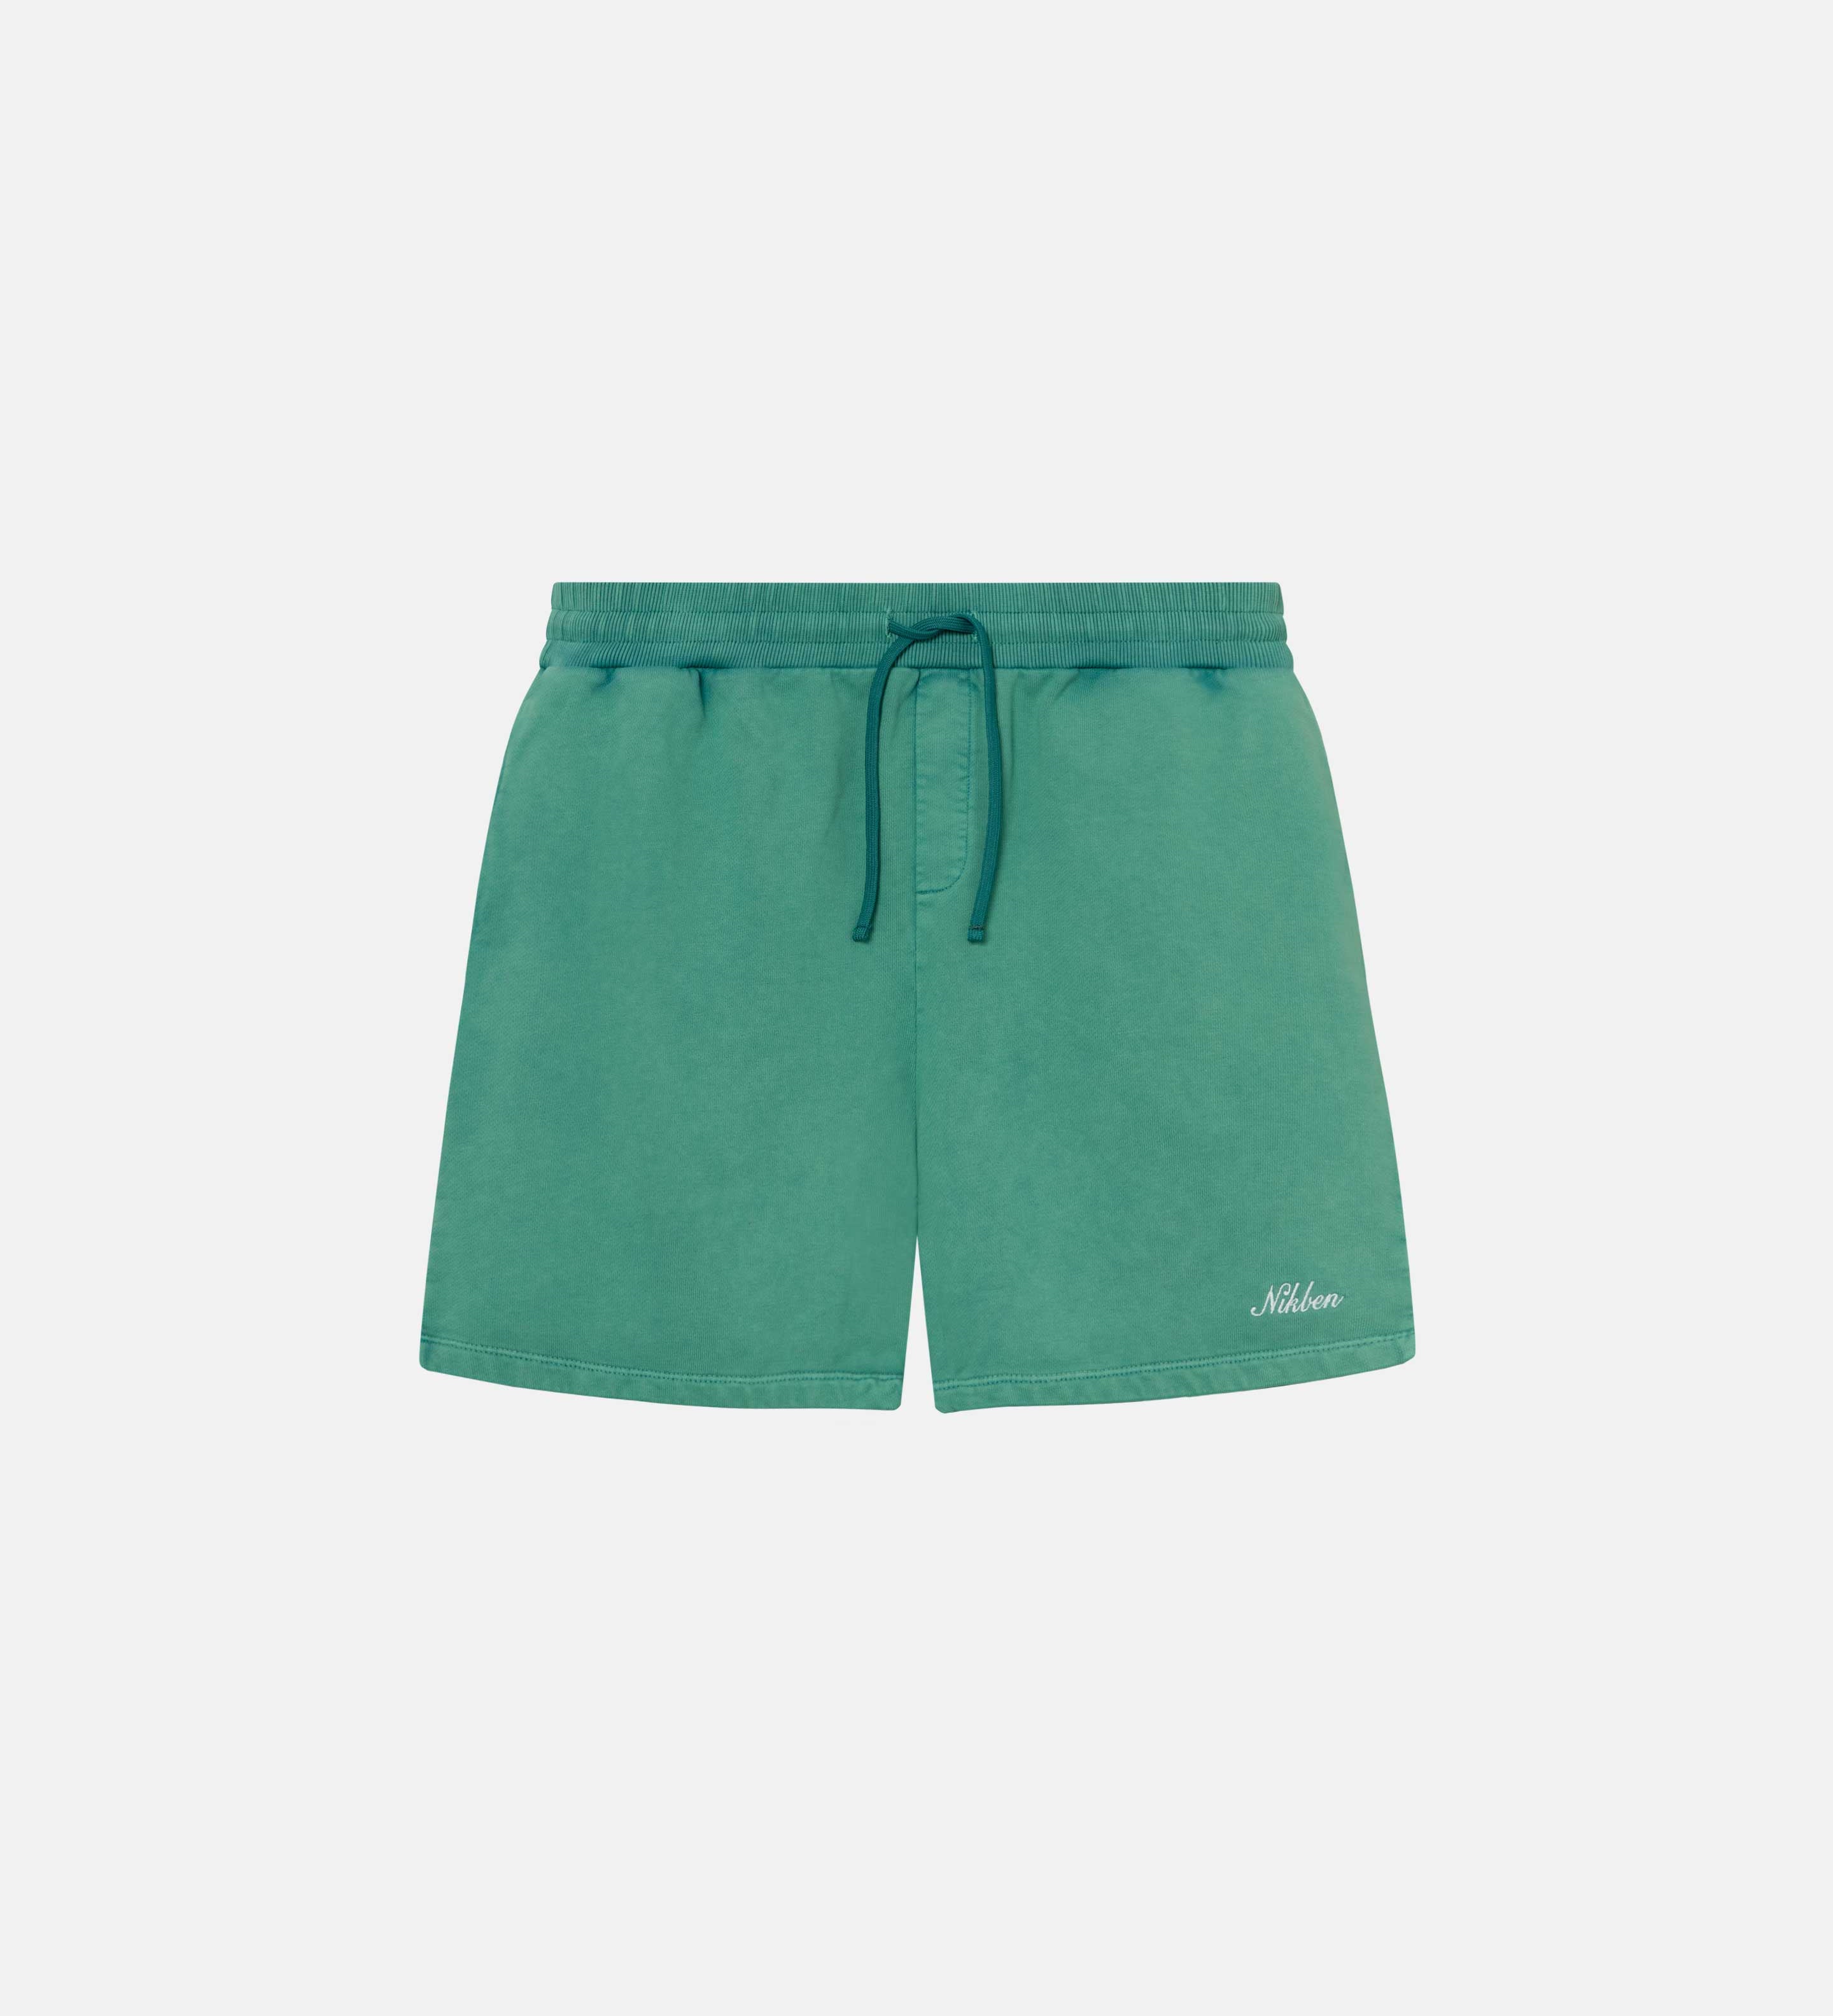 Green sweatshorts with elastic drawstrings and an embroidered script logo on the front leg